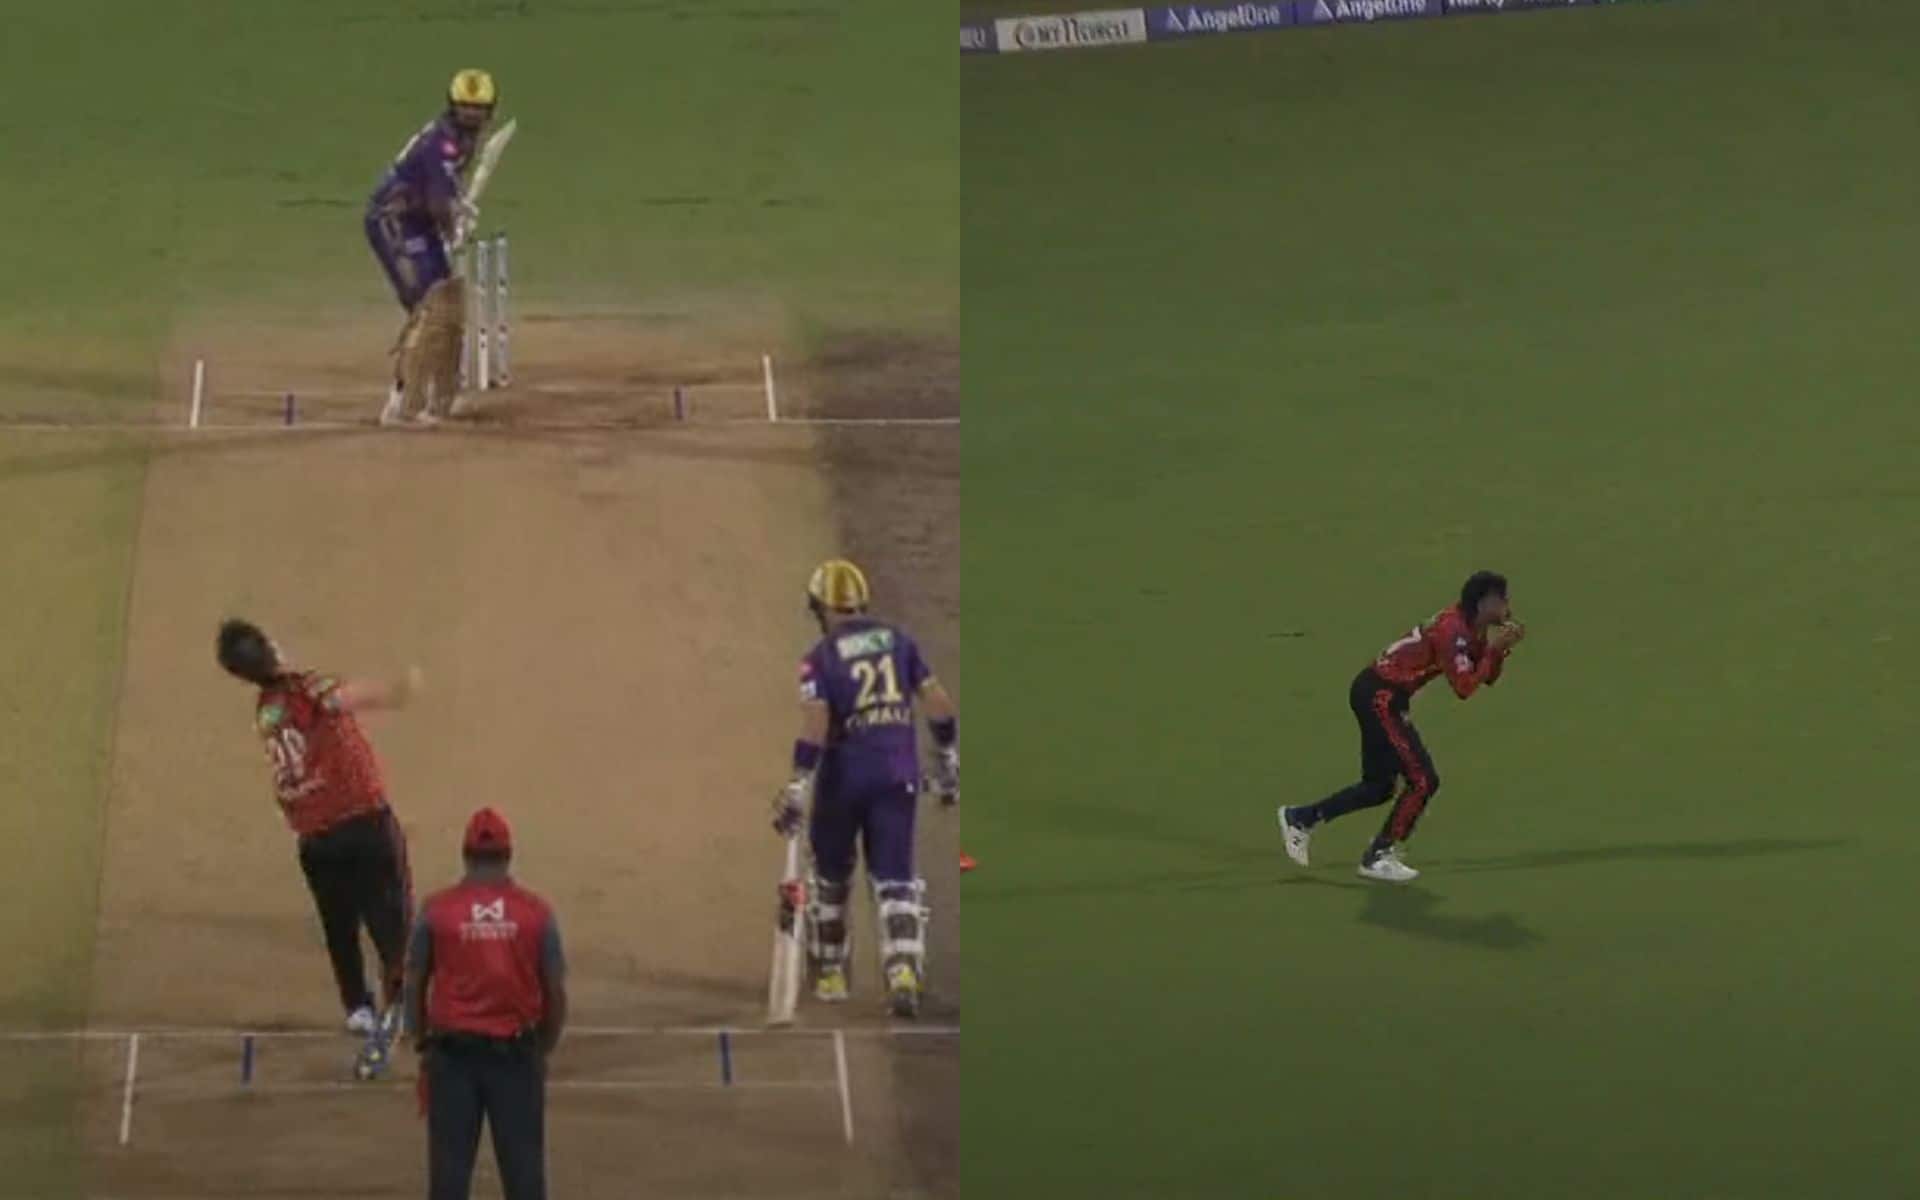 Shahbaz Ahmed kissed the ball after Narine's wicket (x.com)